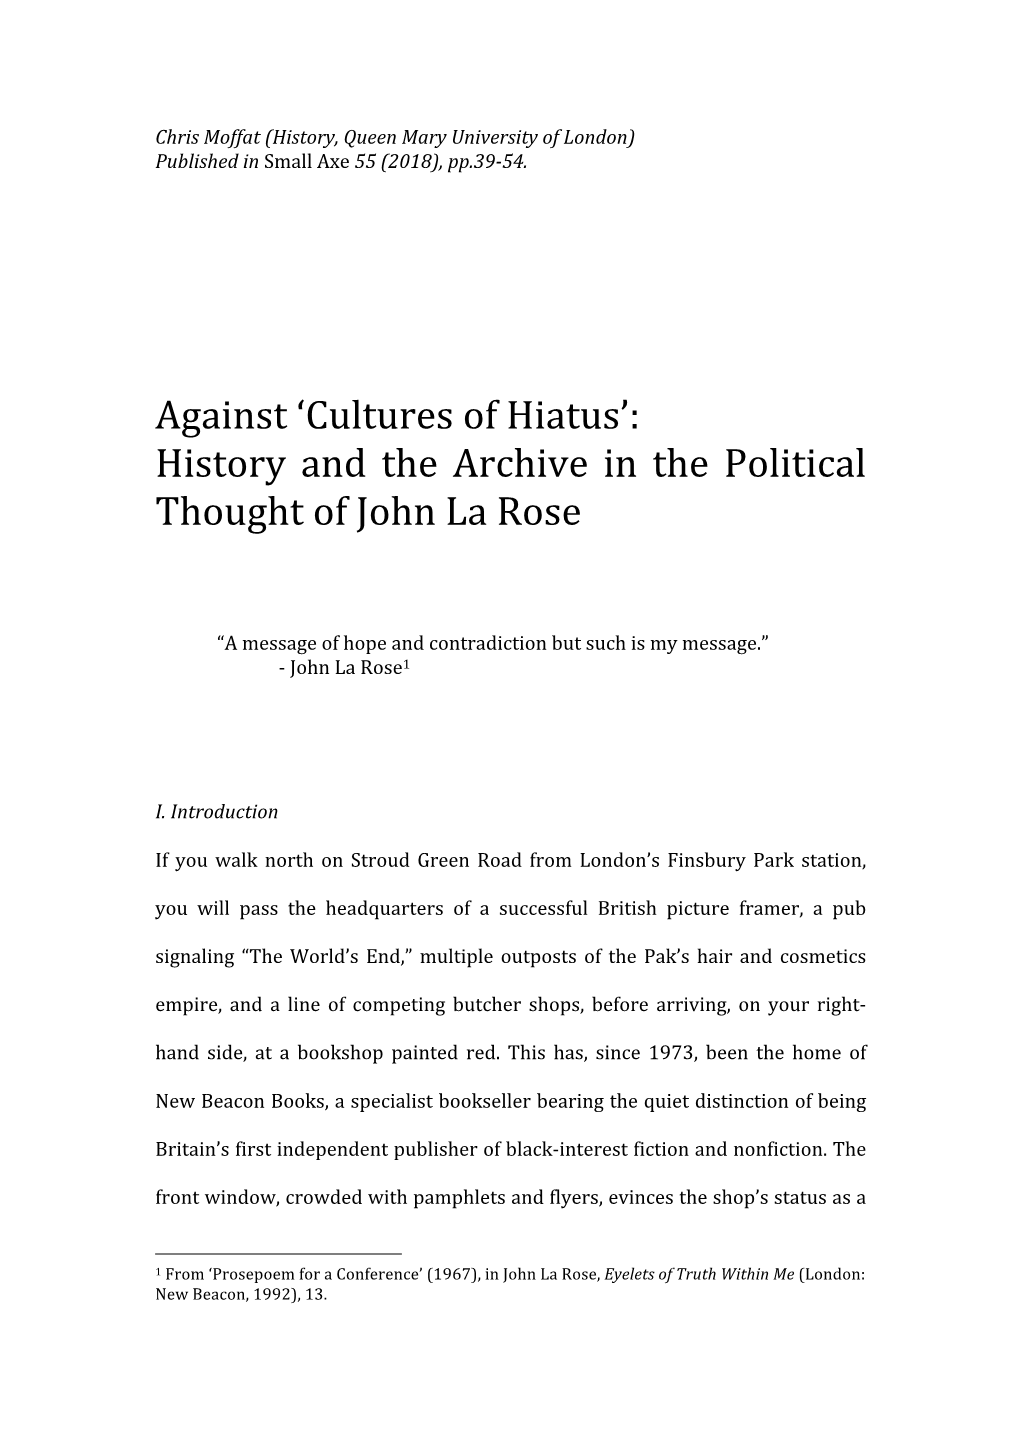 History and the Archive in the Political Thought of John La Rose